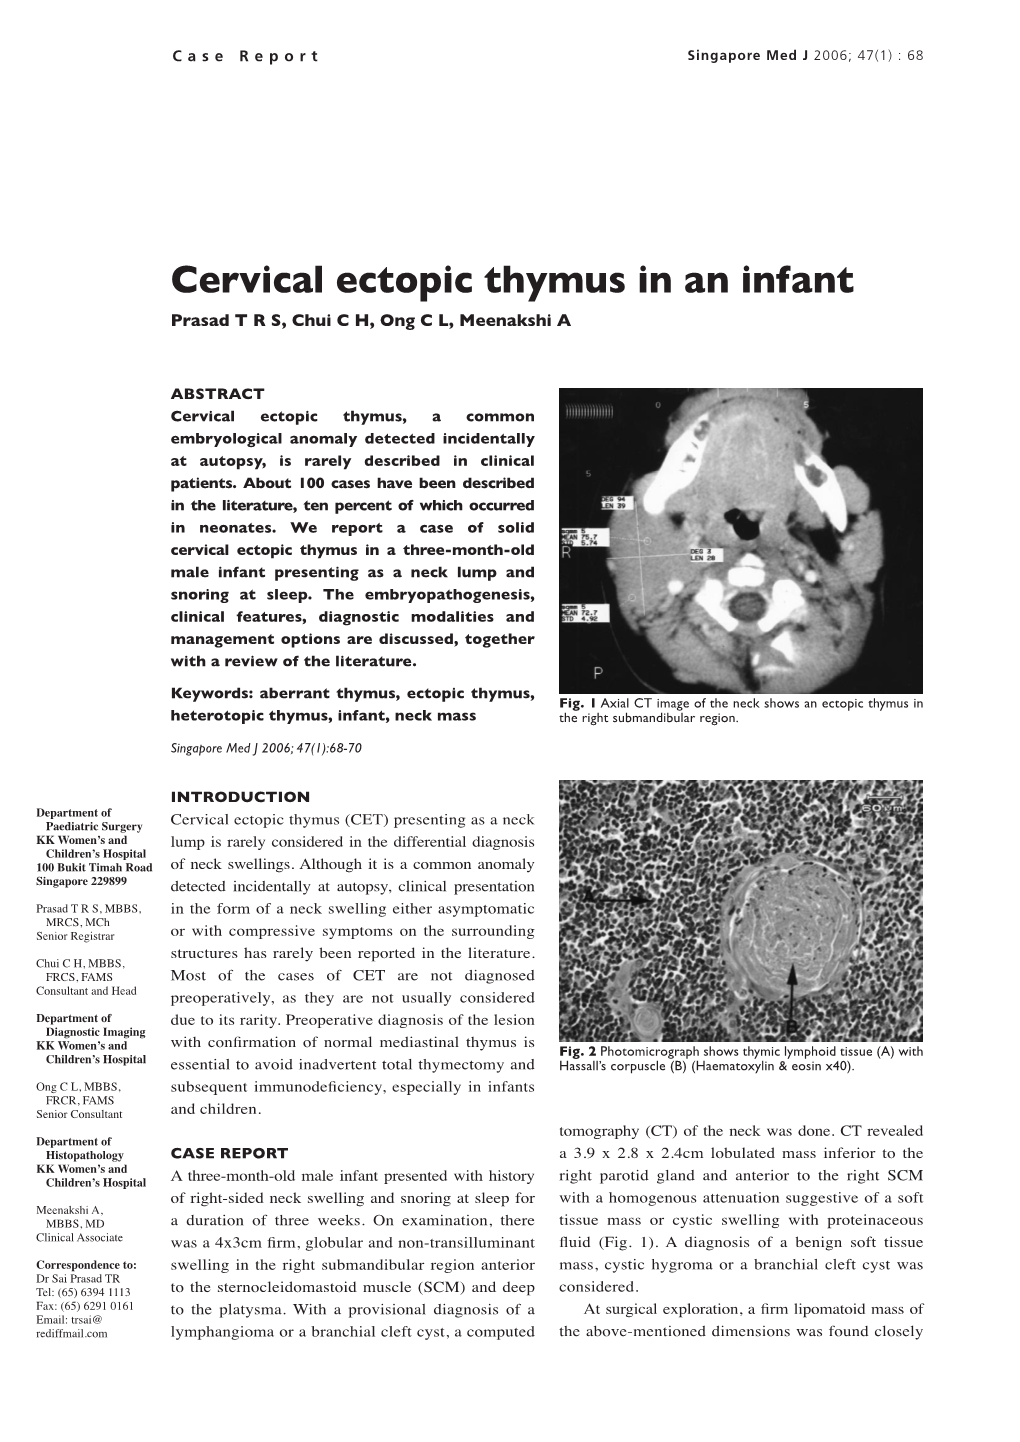 Cervical Ectopic Thymus in an Infant Prasad T R S, Chui C H, Ong C L, Meenakshi A